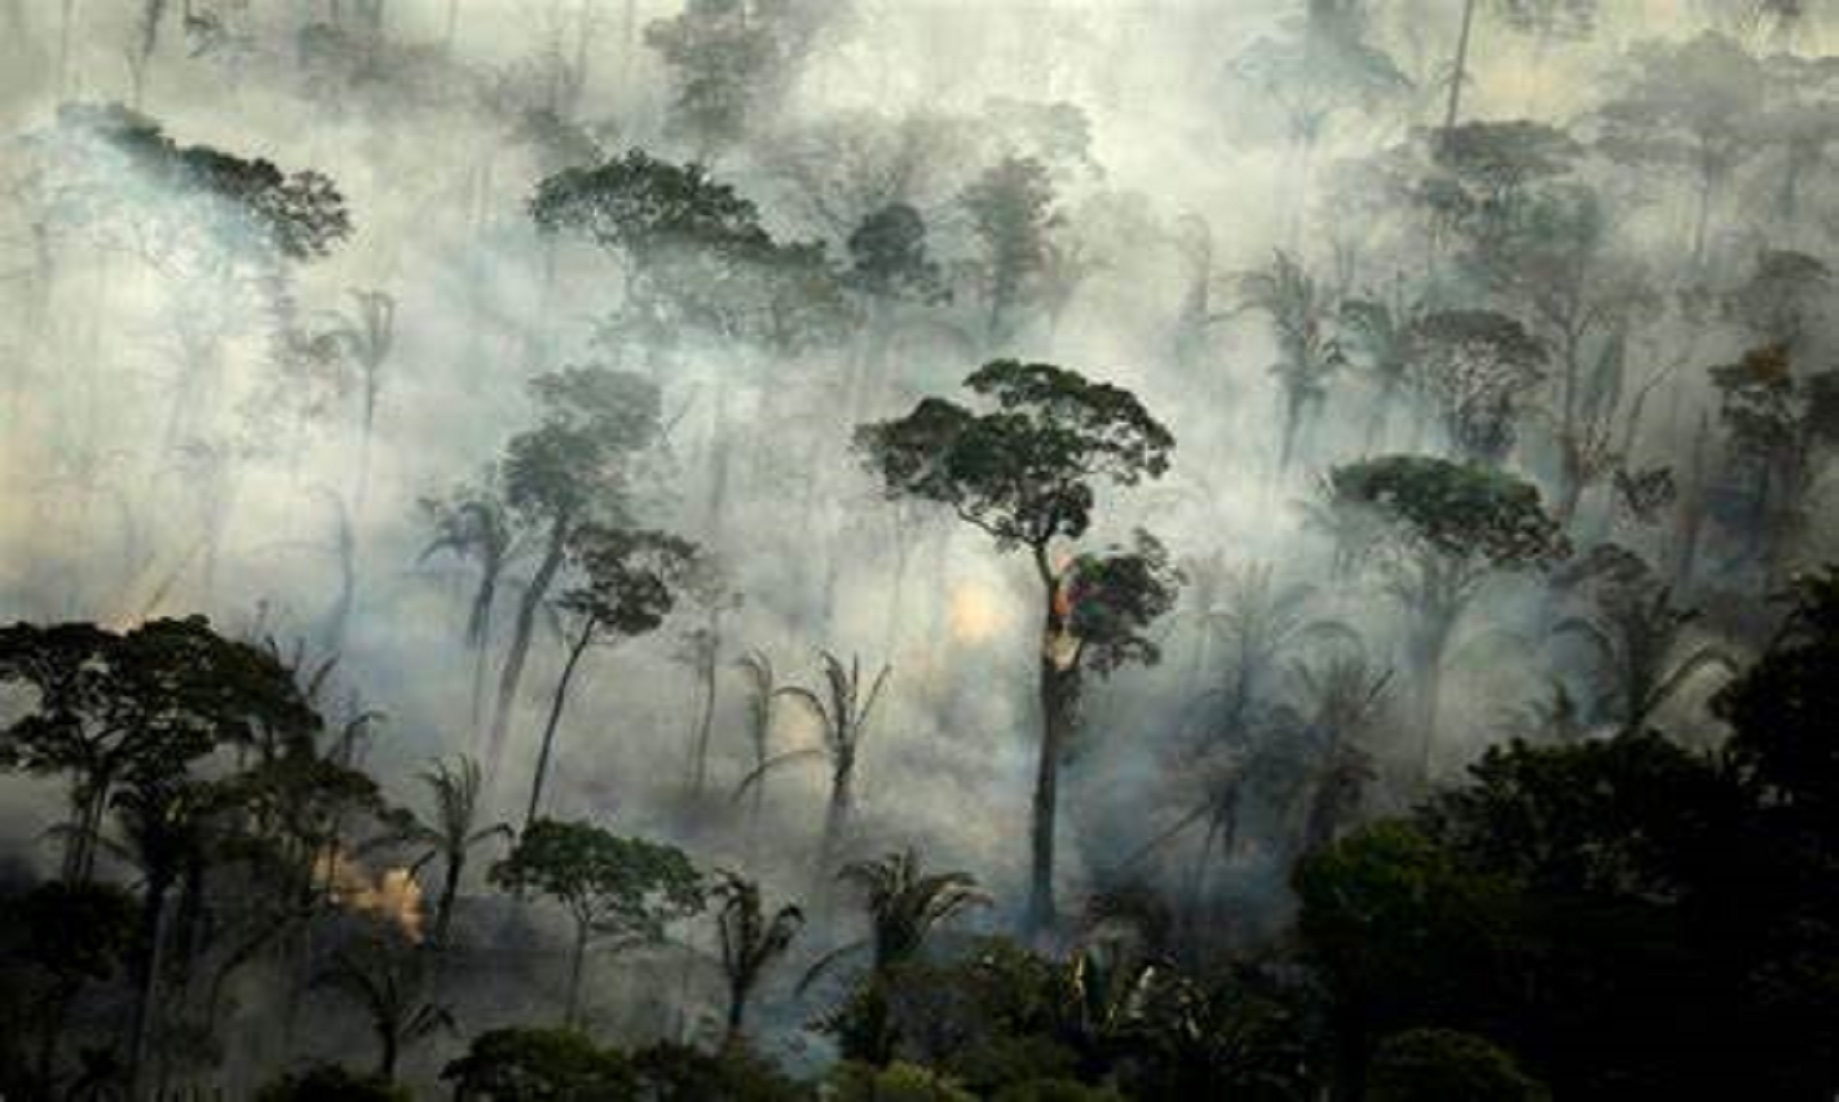 Ecuador Calls For Greater Int’l Cooperation To Protect Amazon Rainforest